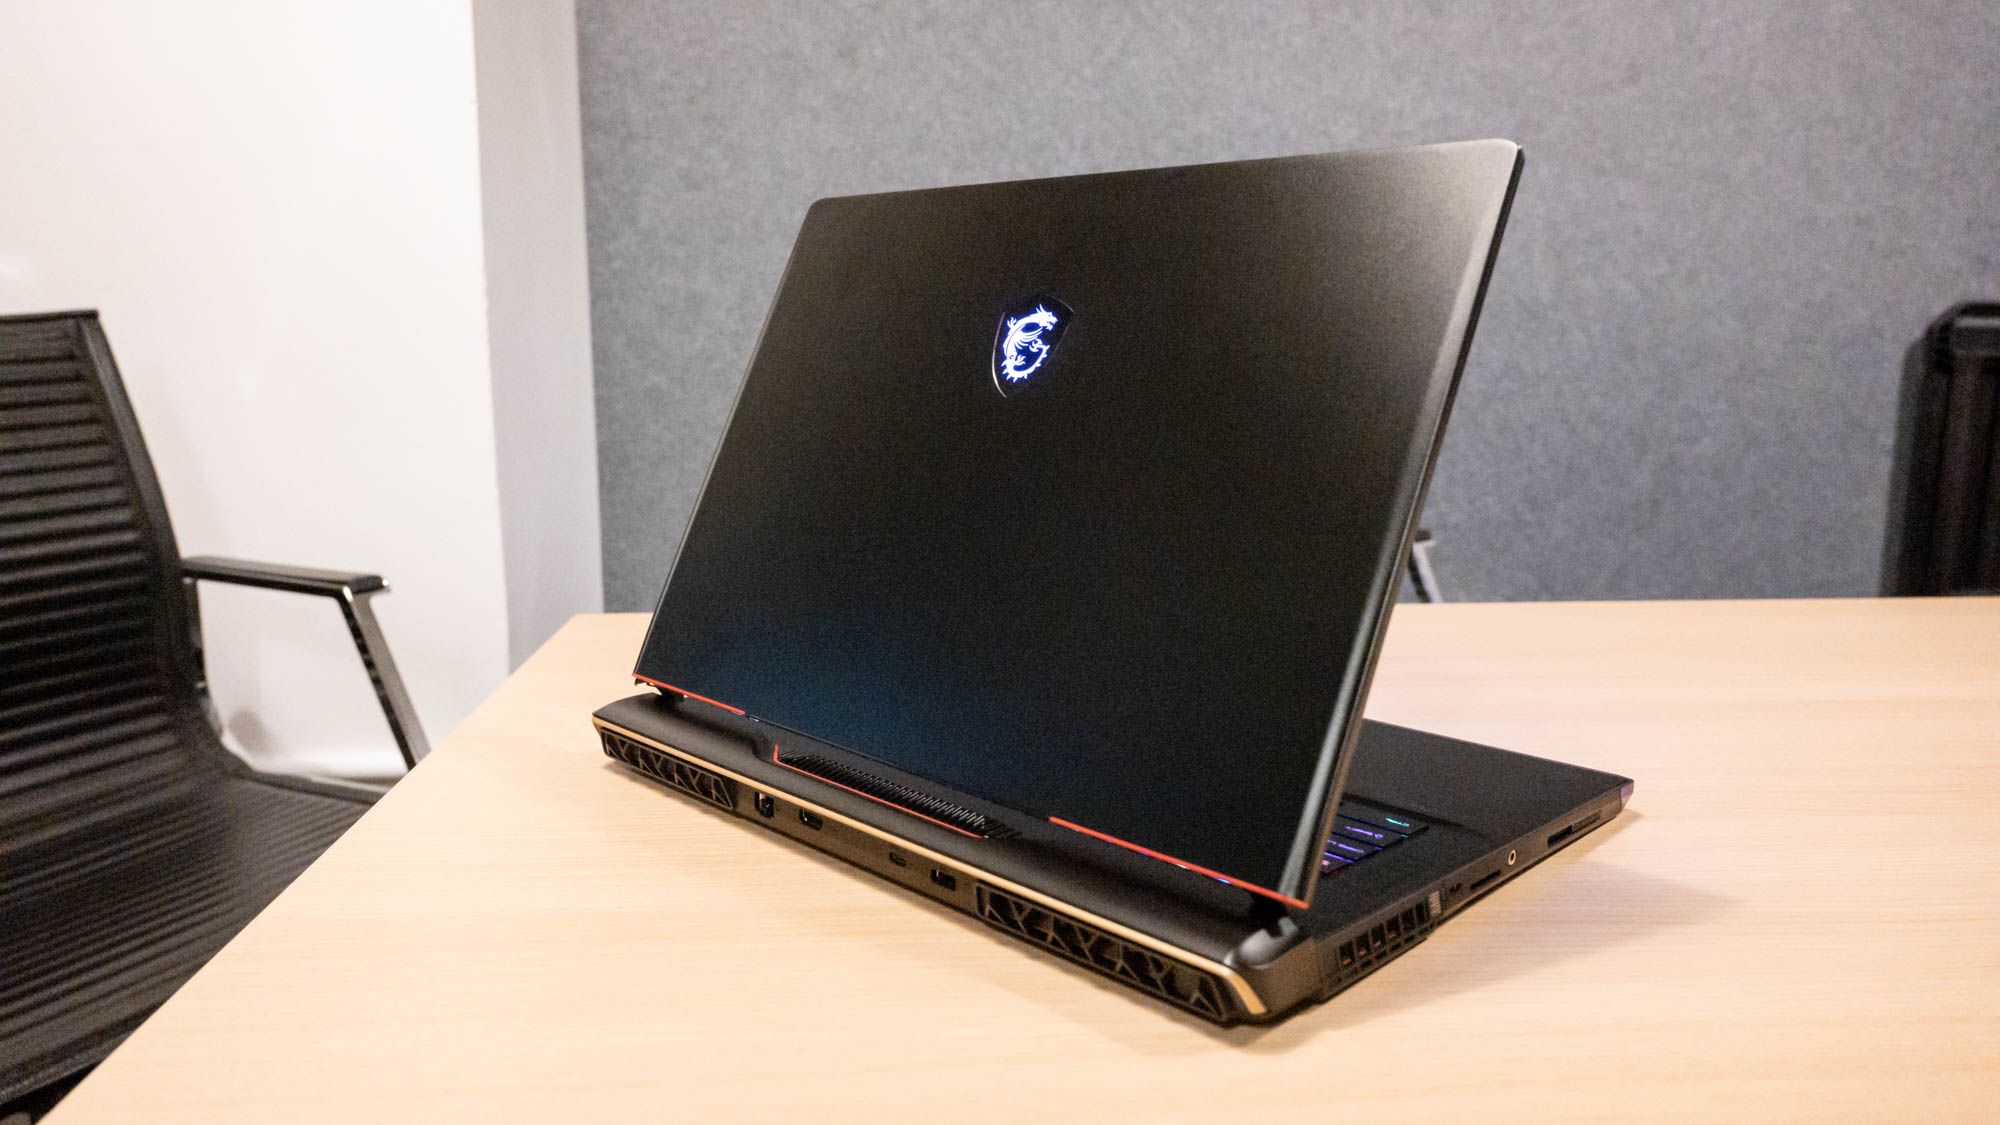 Raider GE78HX is MSI's most vibrant gaming laptop at CES 2023 Laptop Mag